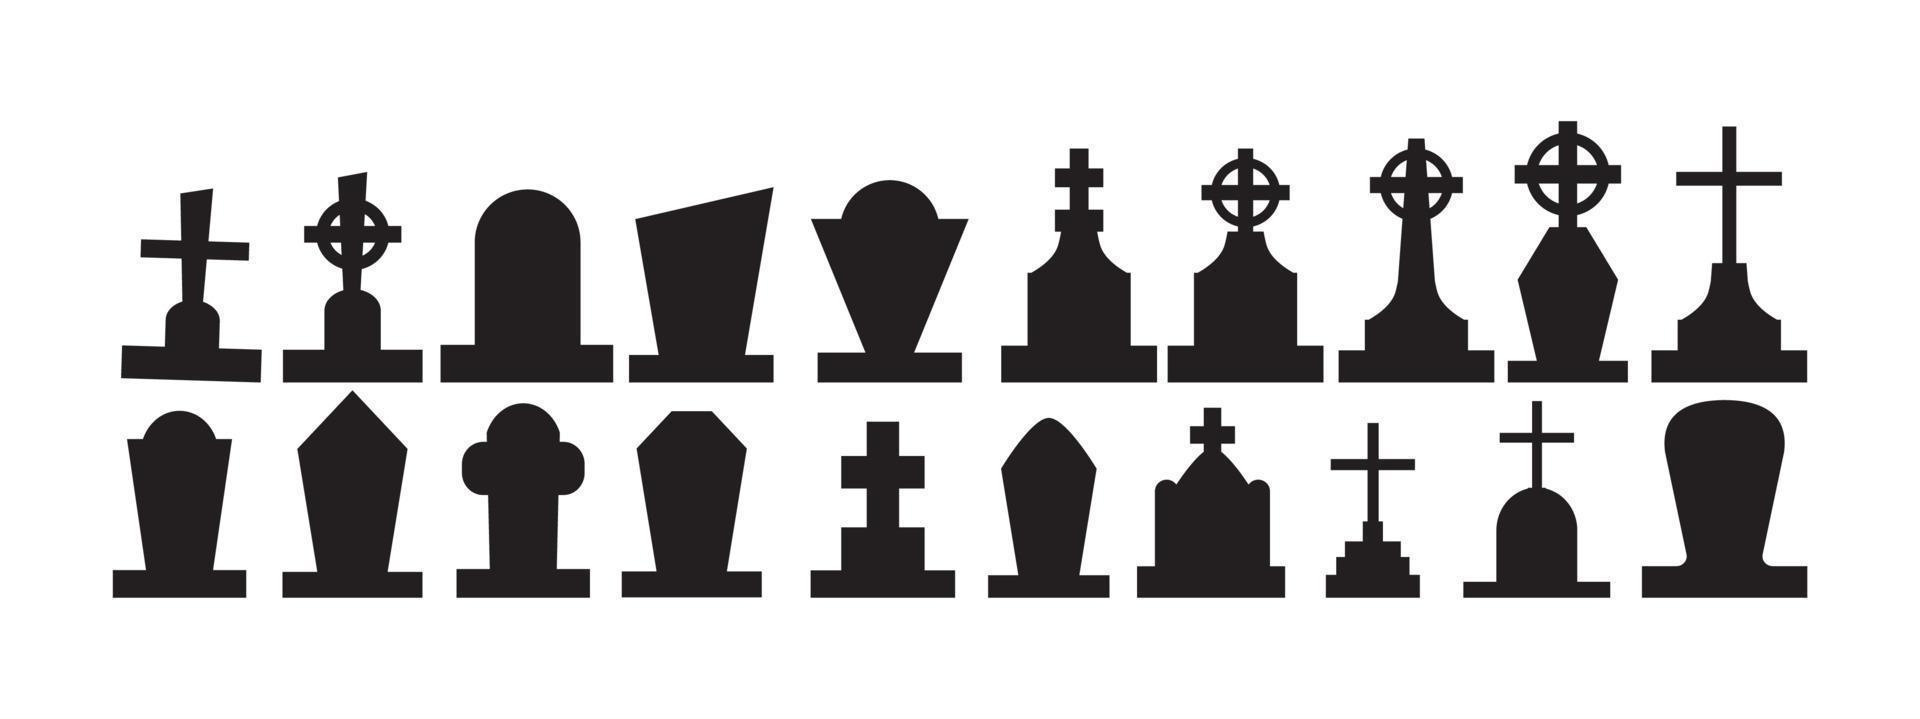 Selection of gravestones from the halloween cemetery on a white background - Vector